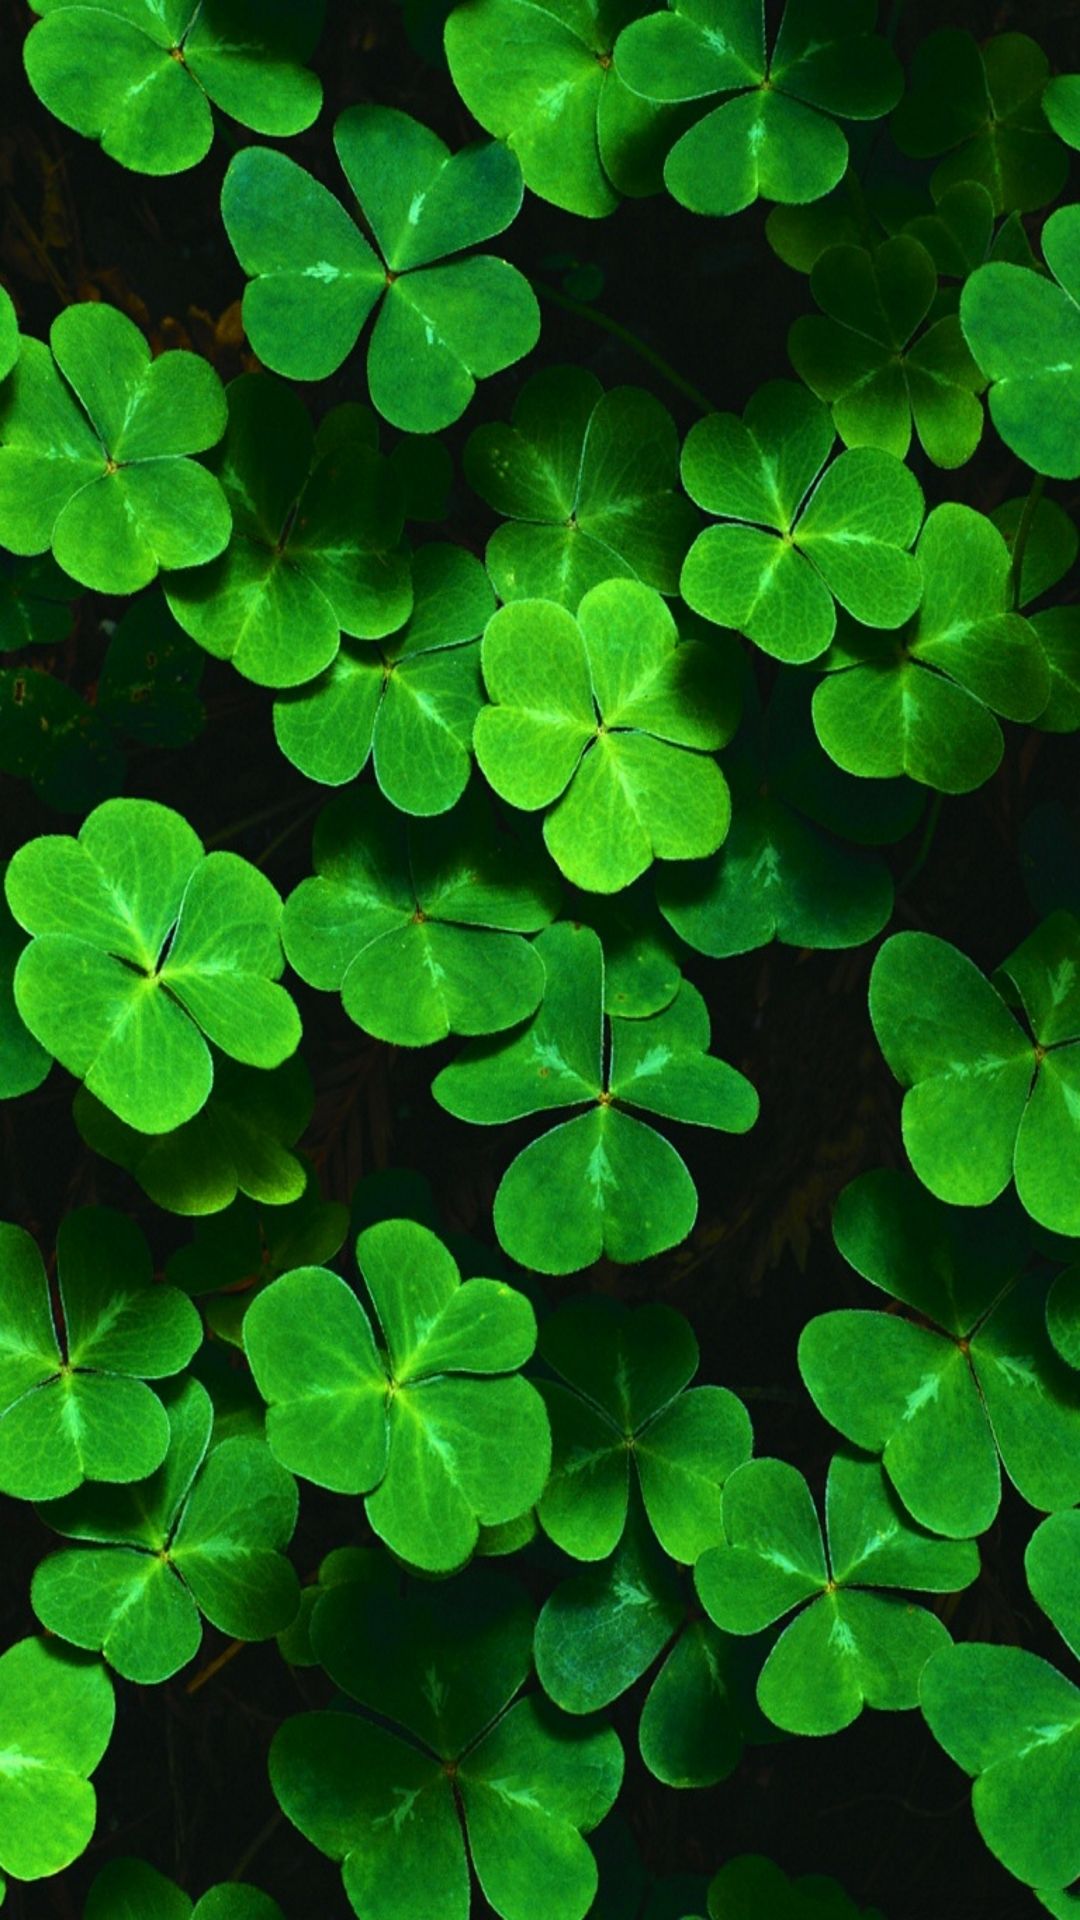 Cellphone Background / Wallpaper for St. PATRICK'S DAY. ☘ | Irish ...